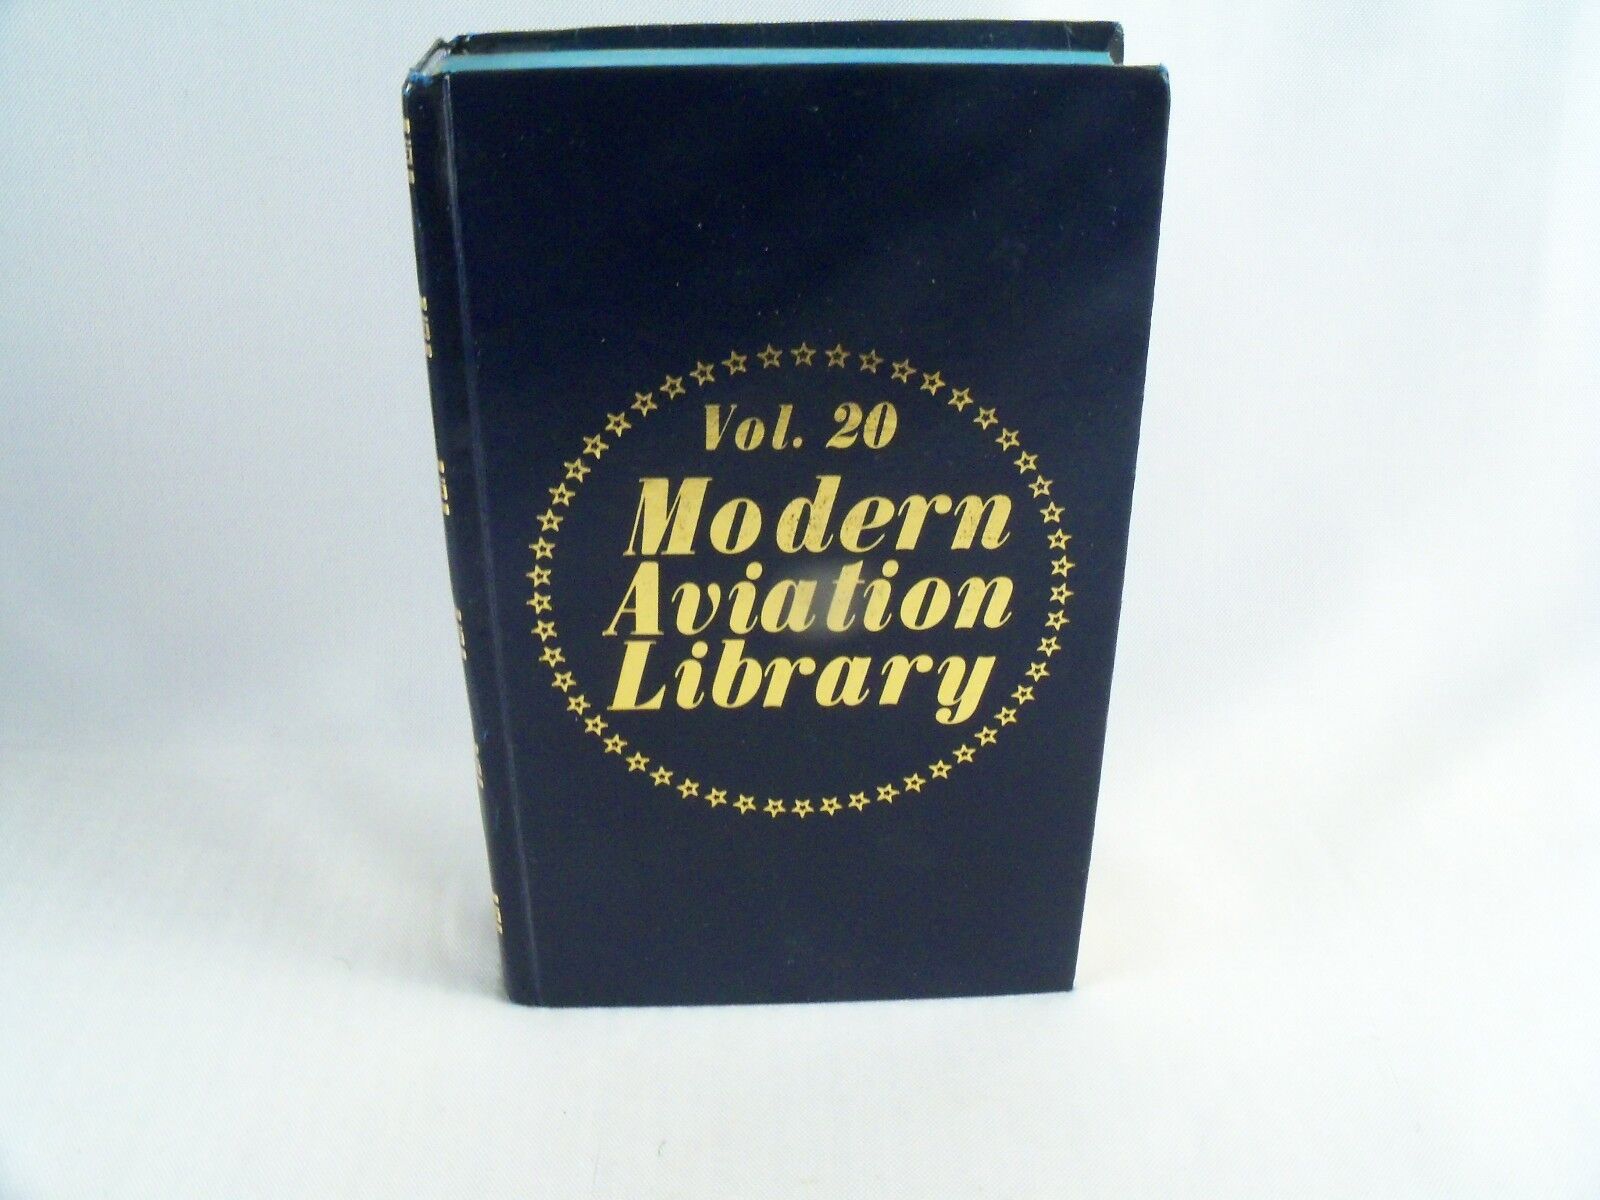 Modern Aviation Library Vol 20 Book 1981 First Edition 